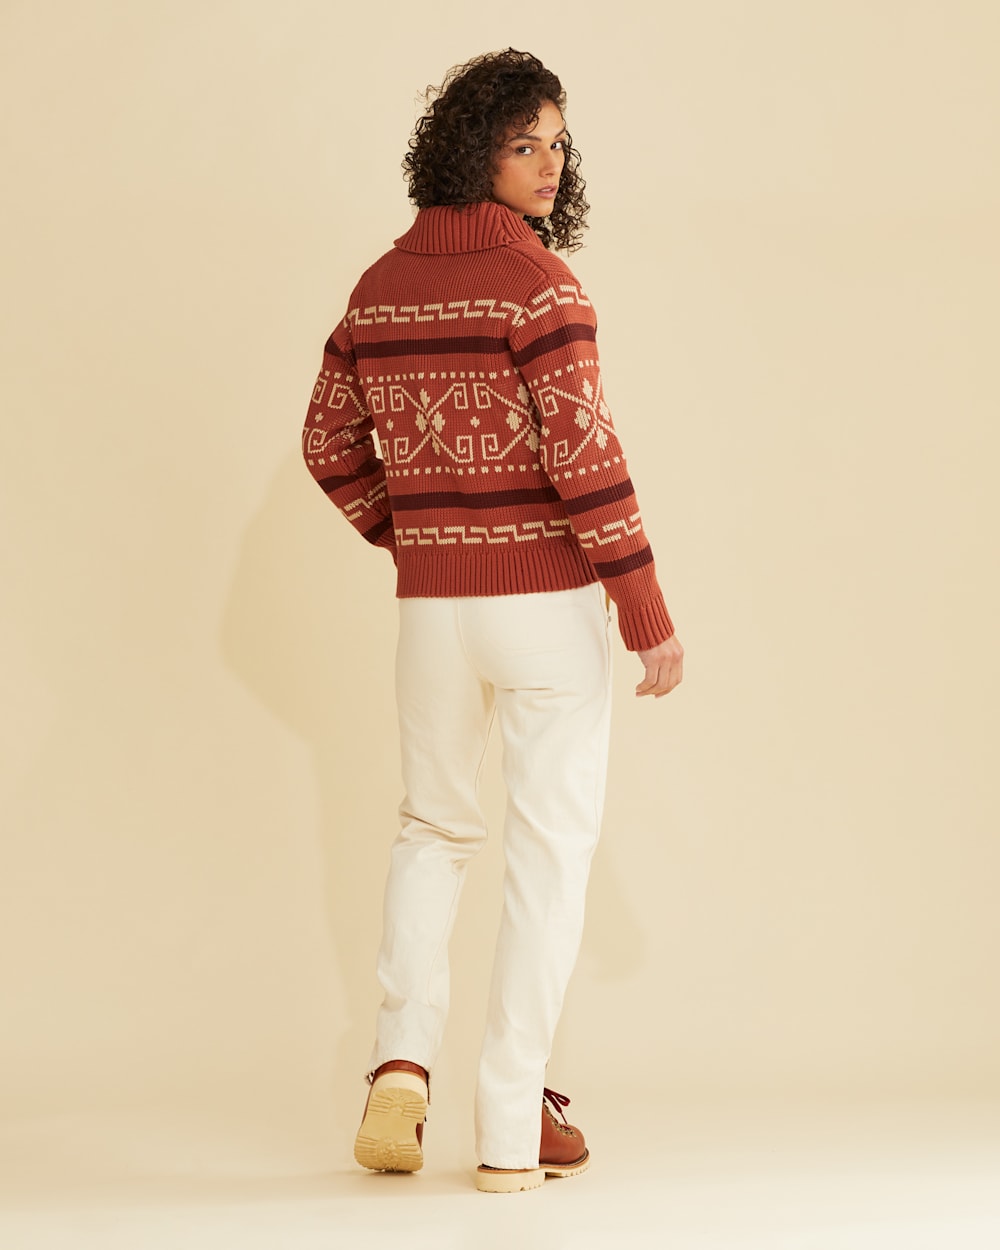 ALTERNATE VIEW OF WOMEN'S WESTERLEY COTTON CARDIGAN IN REDWOOD MULTI image number 3